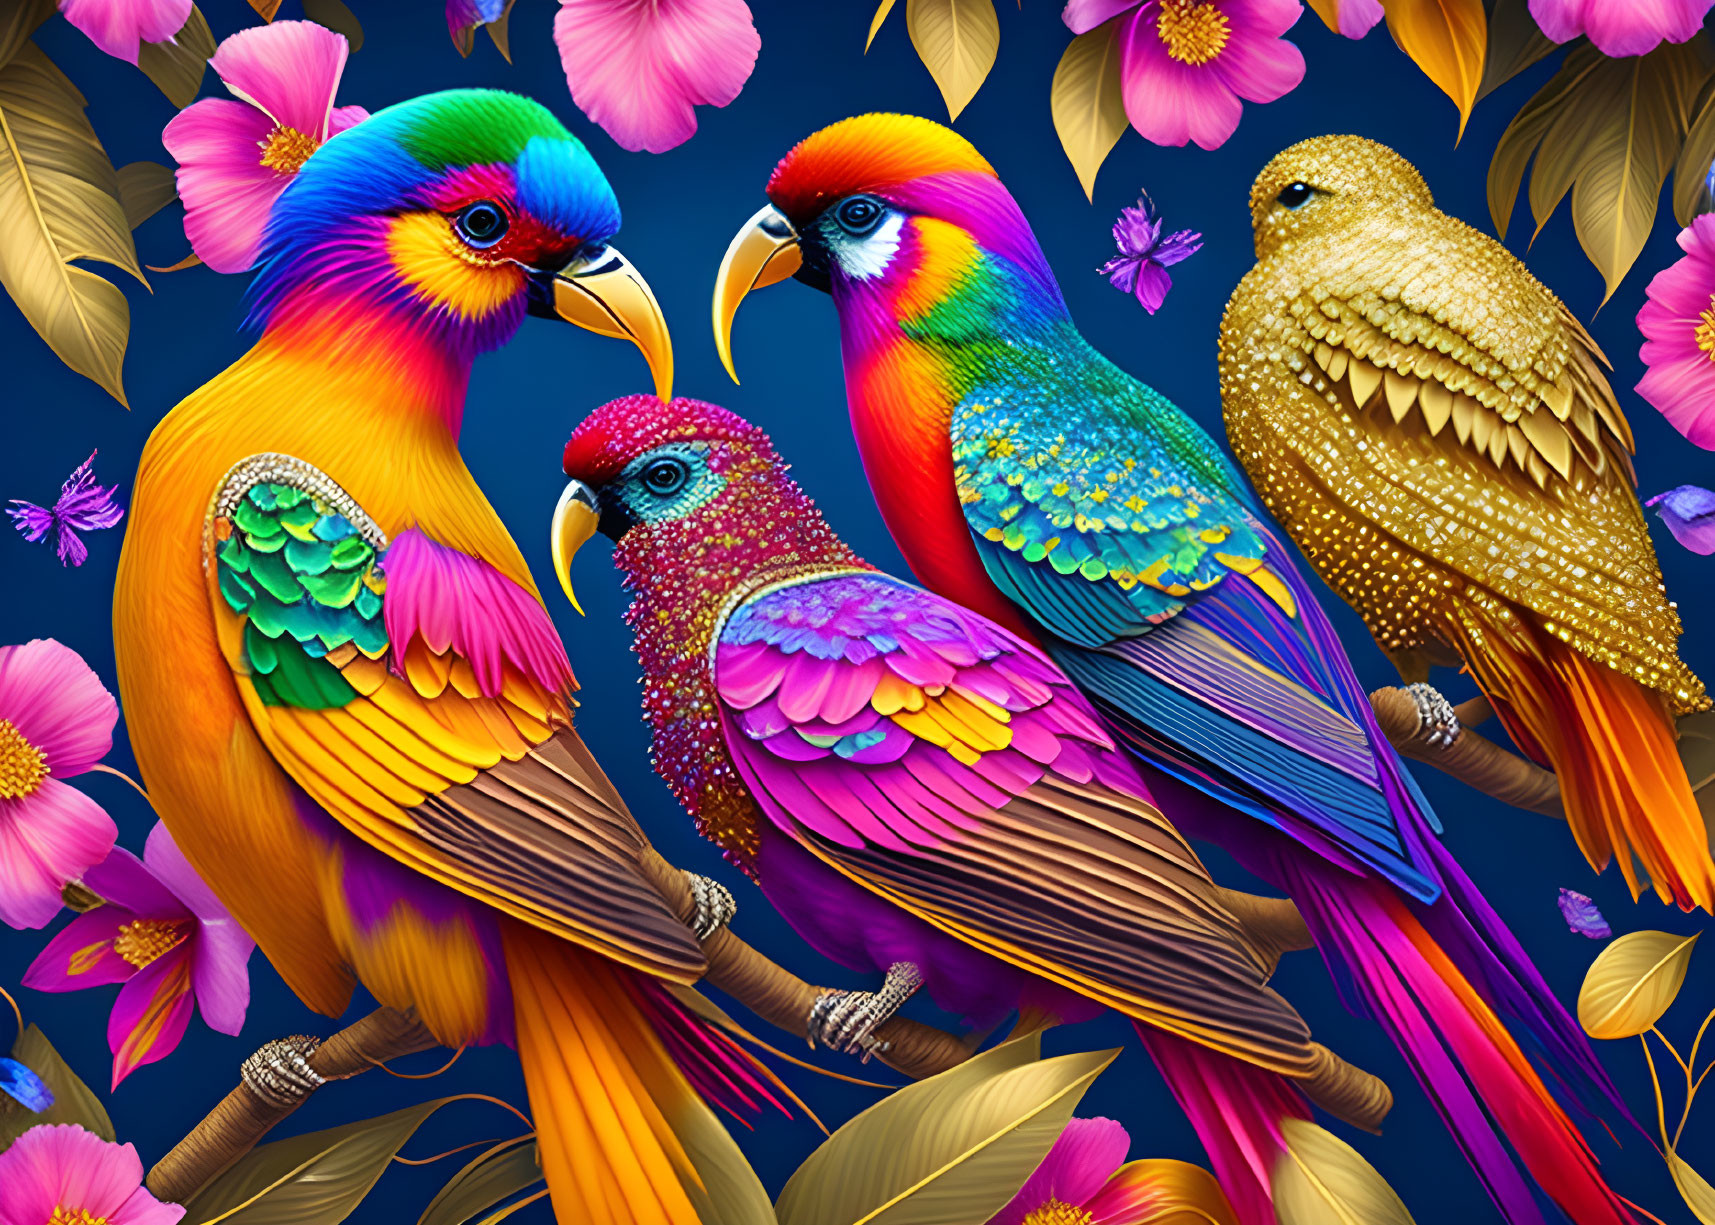 Colorful illustrated parrots with intricate plumage on branches against blue floral backdrop